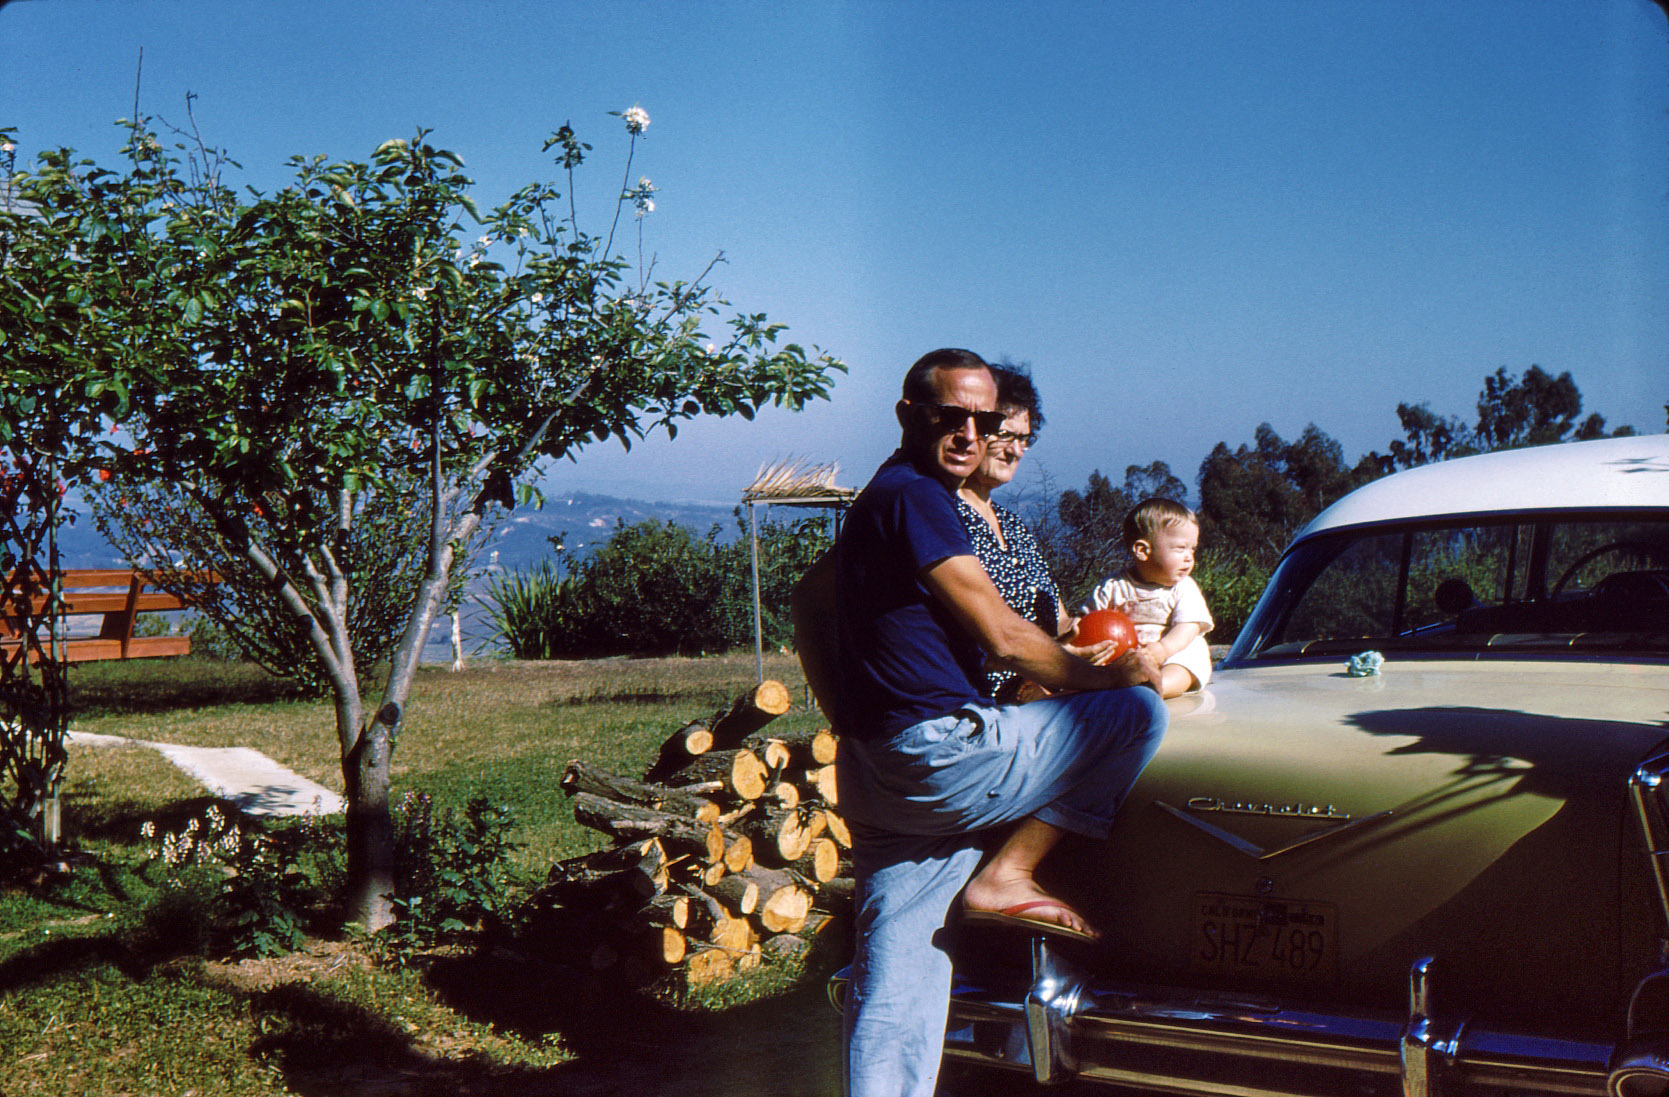 The man who looks like he's ready to hunt a giant shark is Bob Beach. Behind him is Bob's son, Rob, and next to Rob is his grandma. Taken on Crest Drive in Cardiff, California, June 1960. 35mm Kodachrome slide. View full size